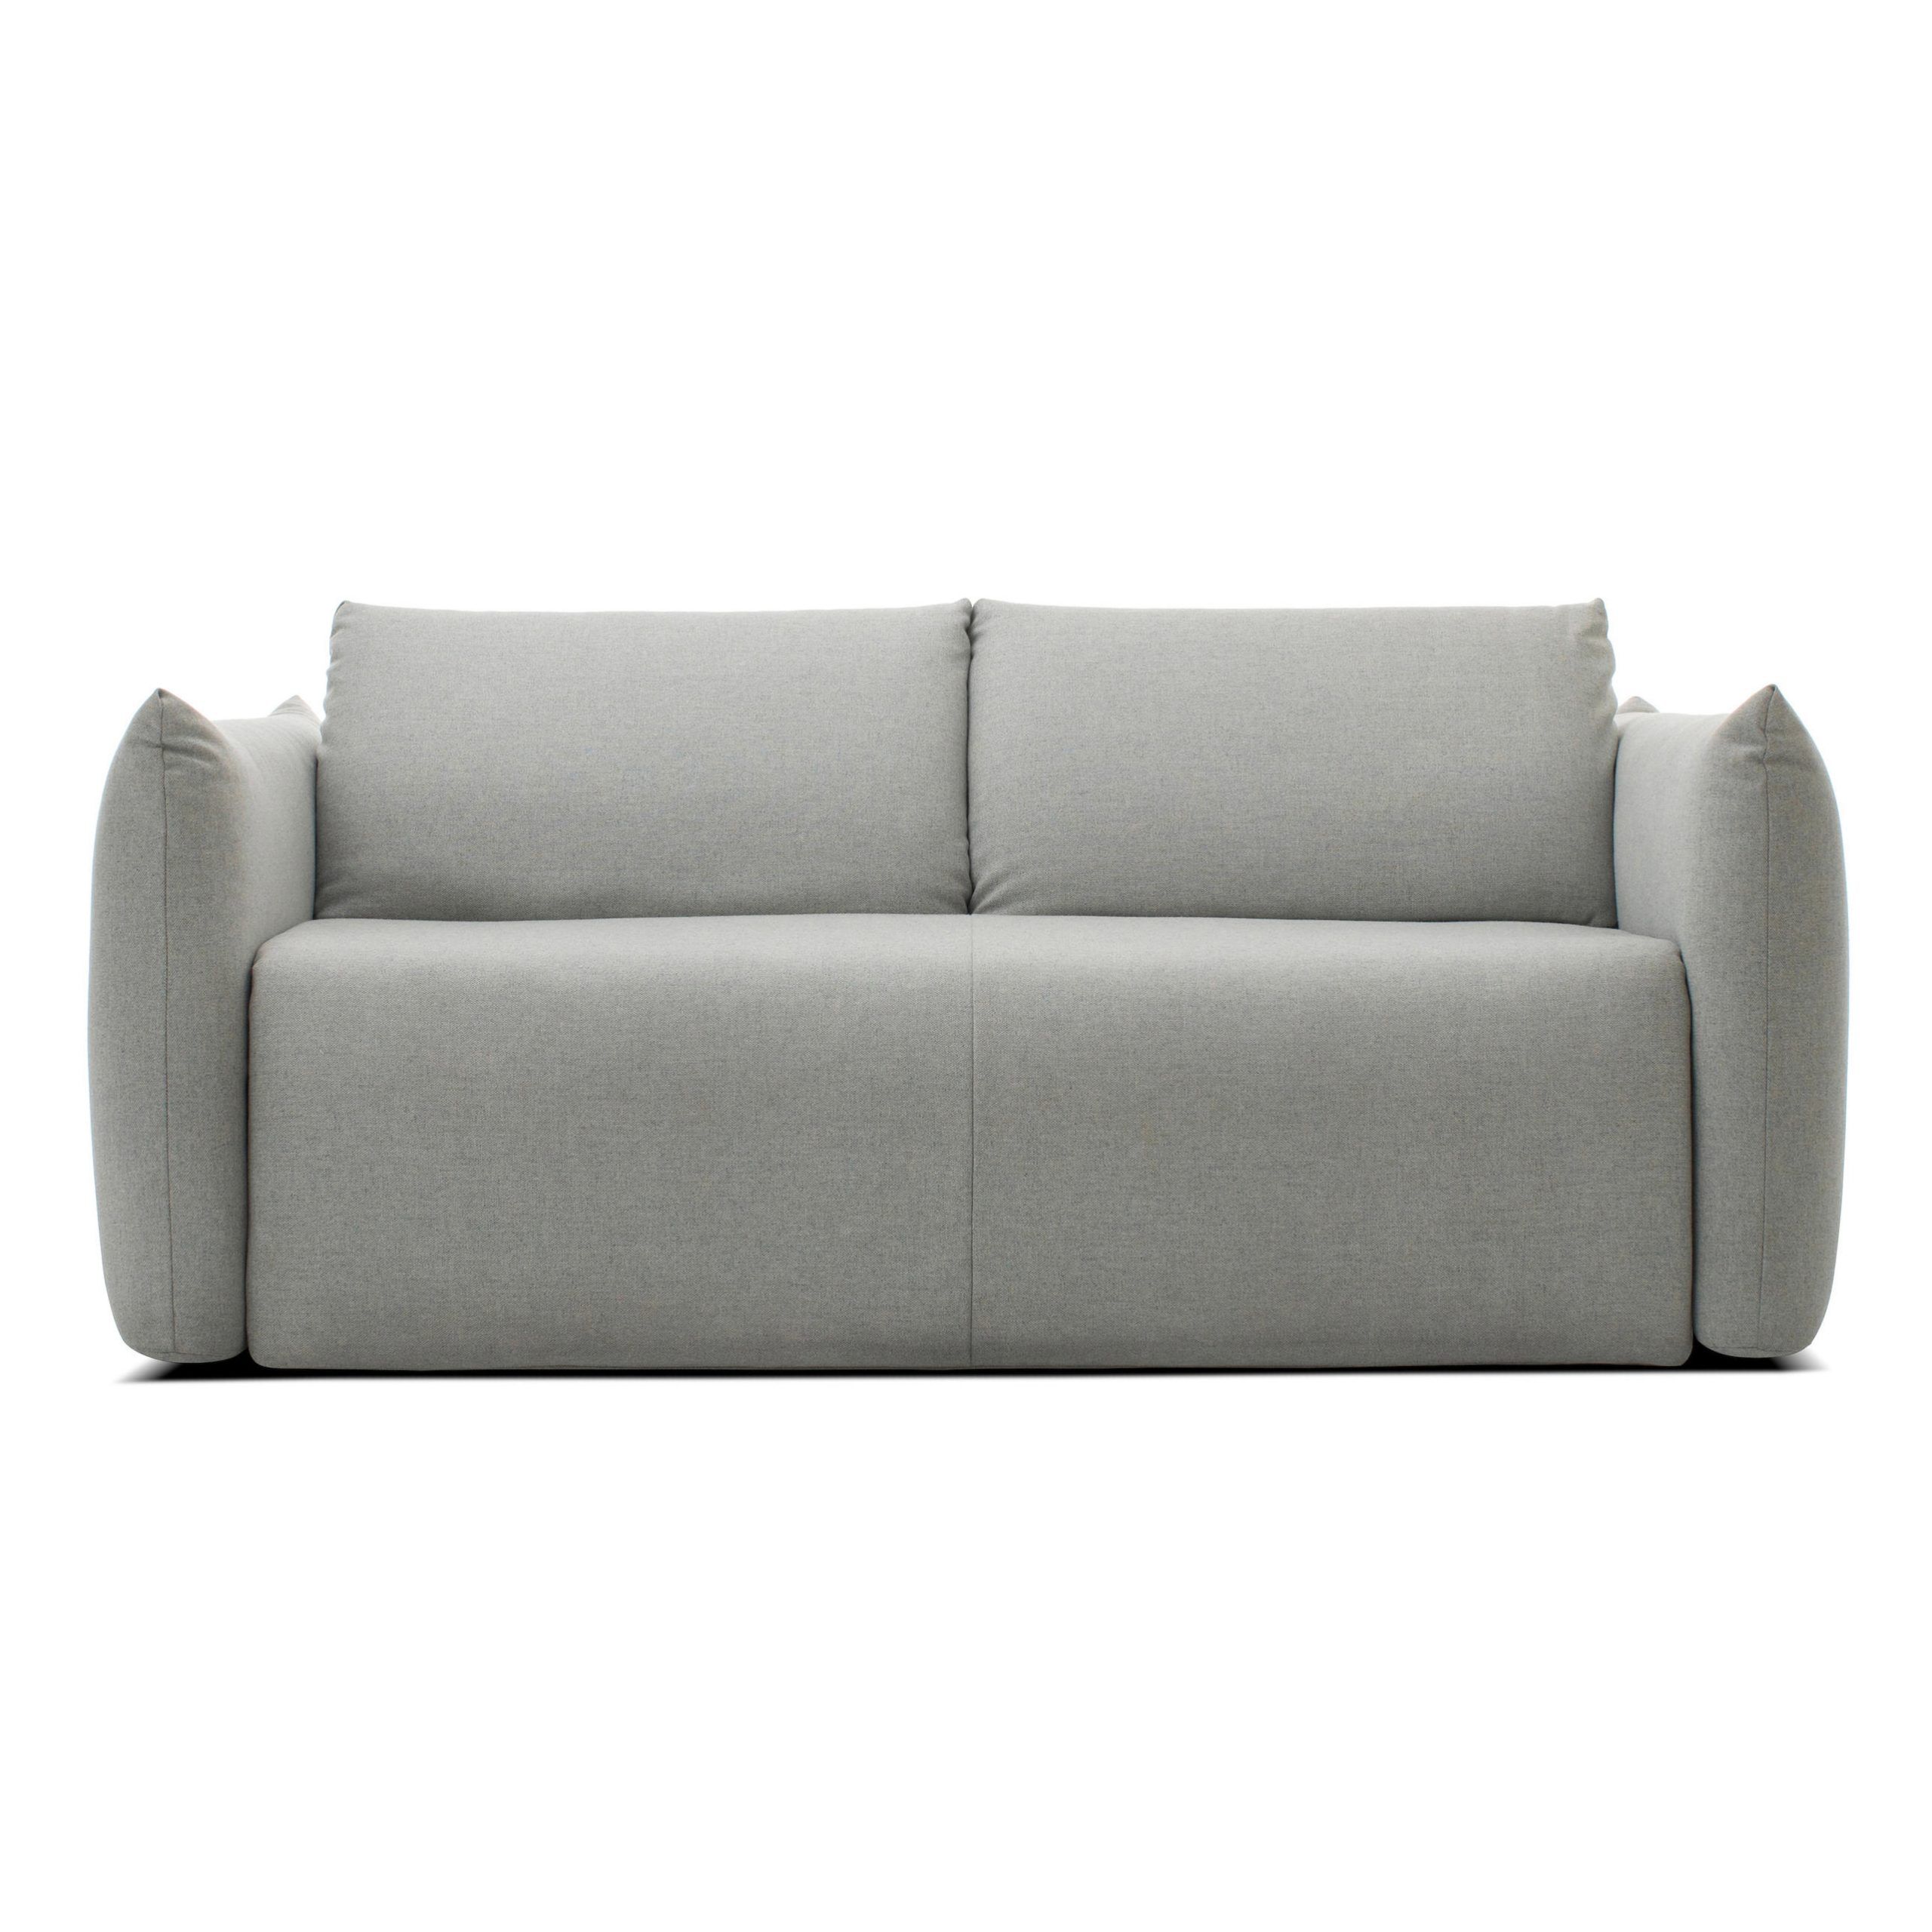 Luna Sofa Bed – Sofas From Extraform | Architonic Intended For Luna Leather Sectional Sofas (View 11 of 15)